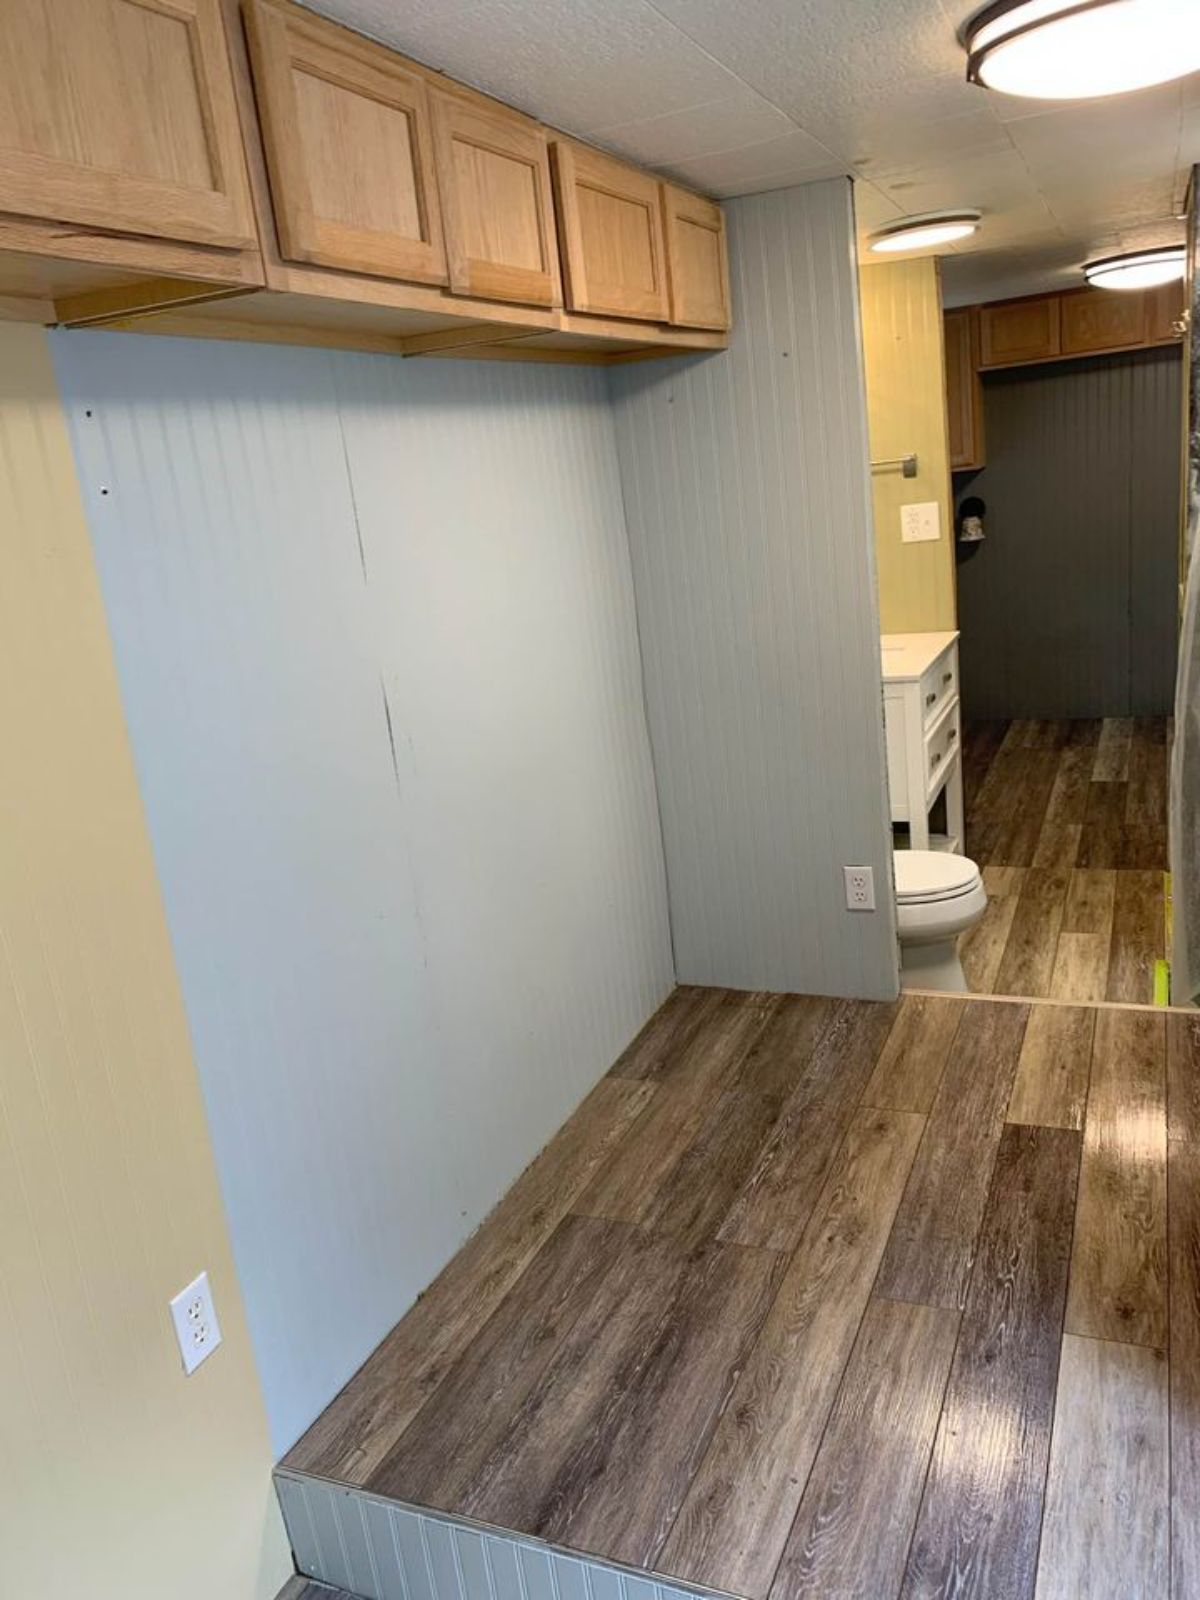 light gray walls with wood flooring podum beneath cabinets in tiny home